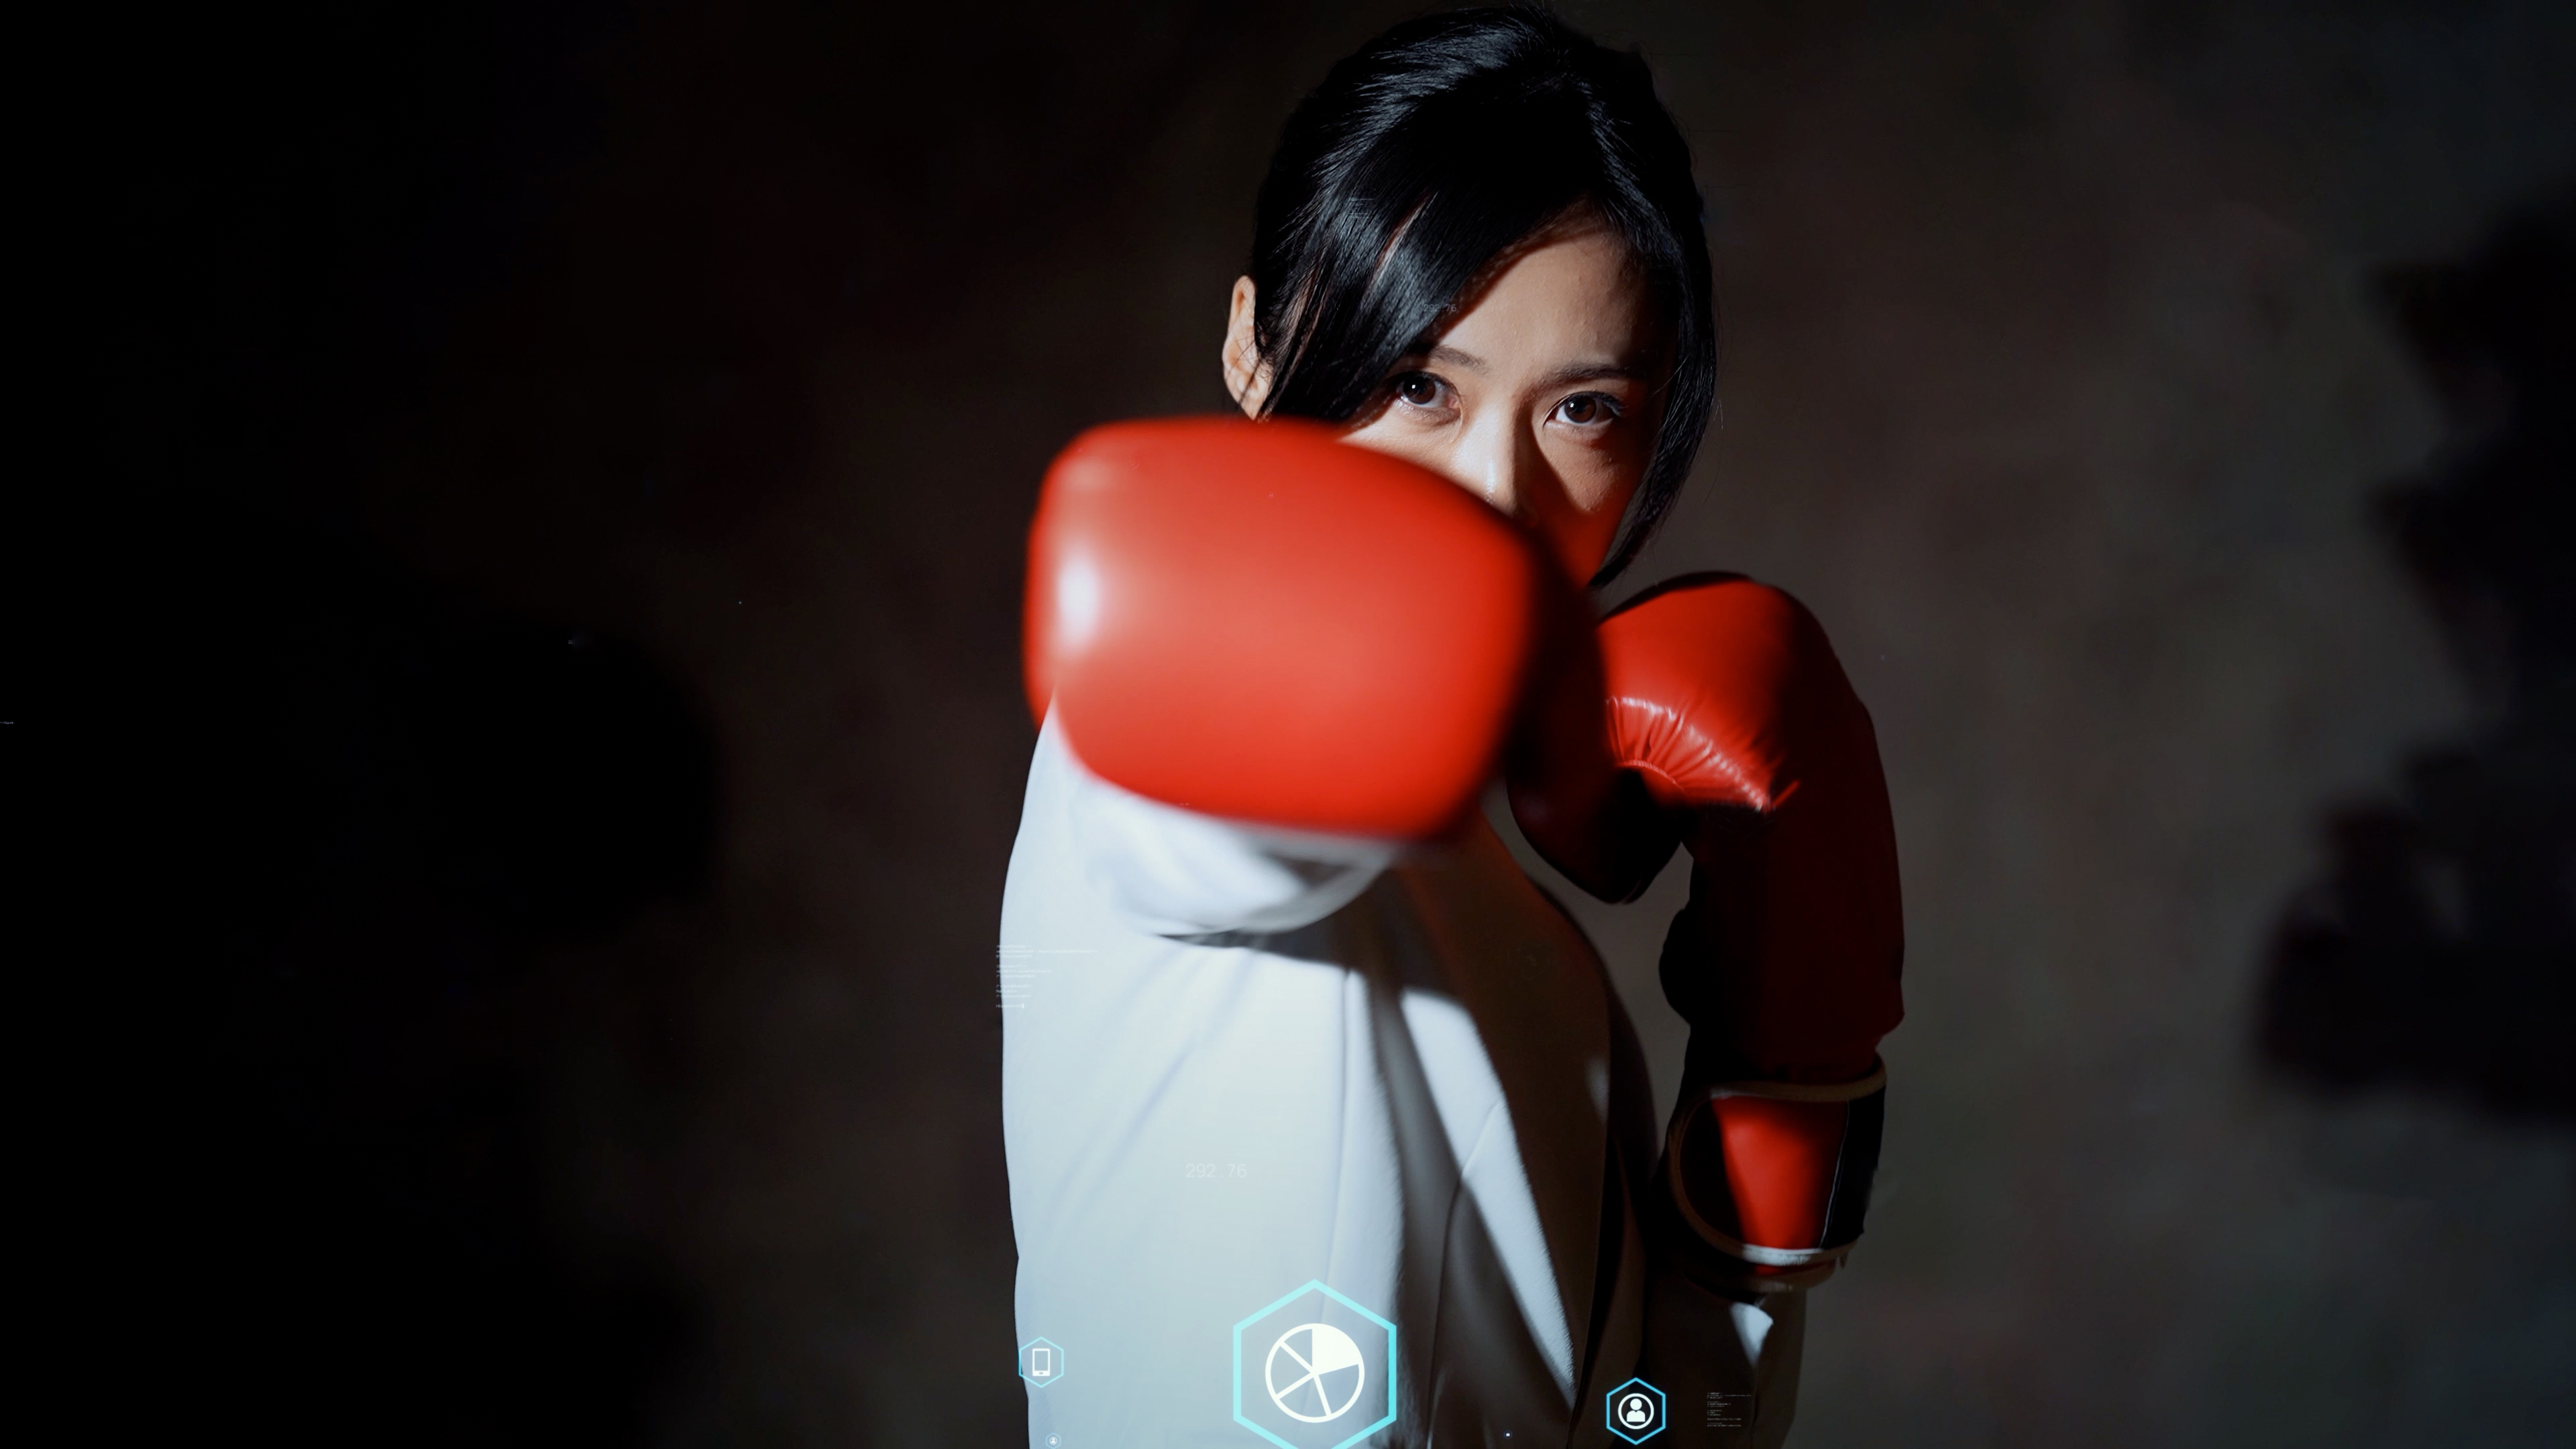 Packing a punch in APAC: FAST continues to boom